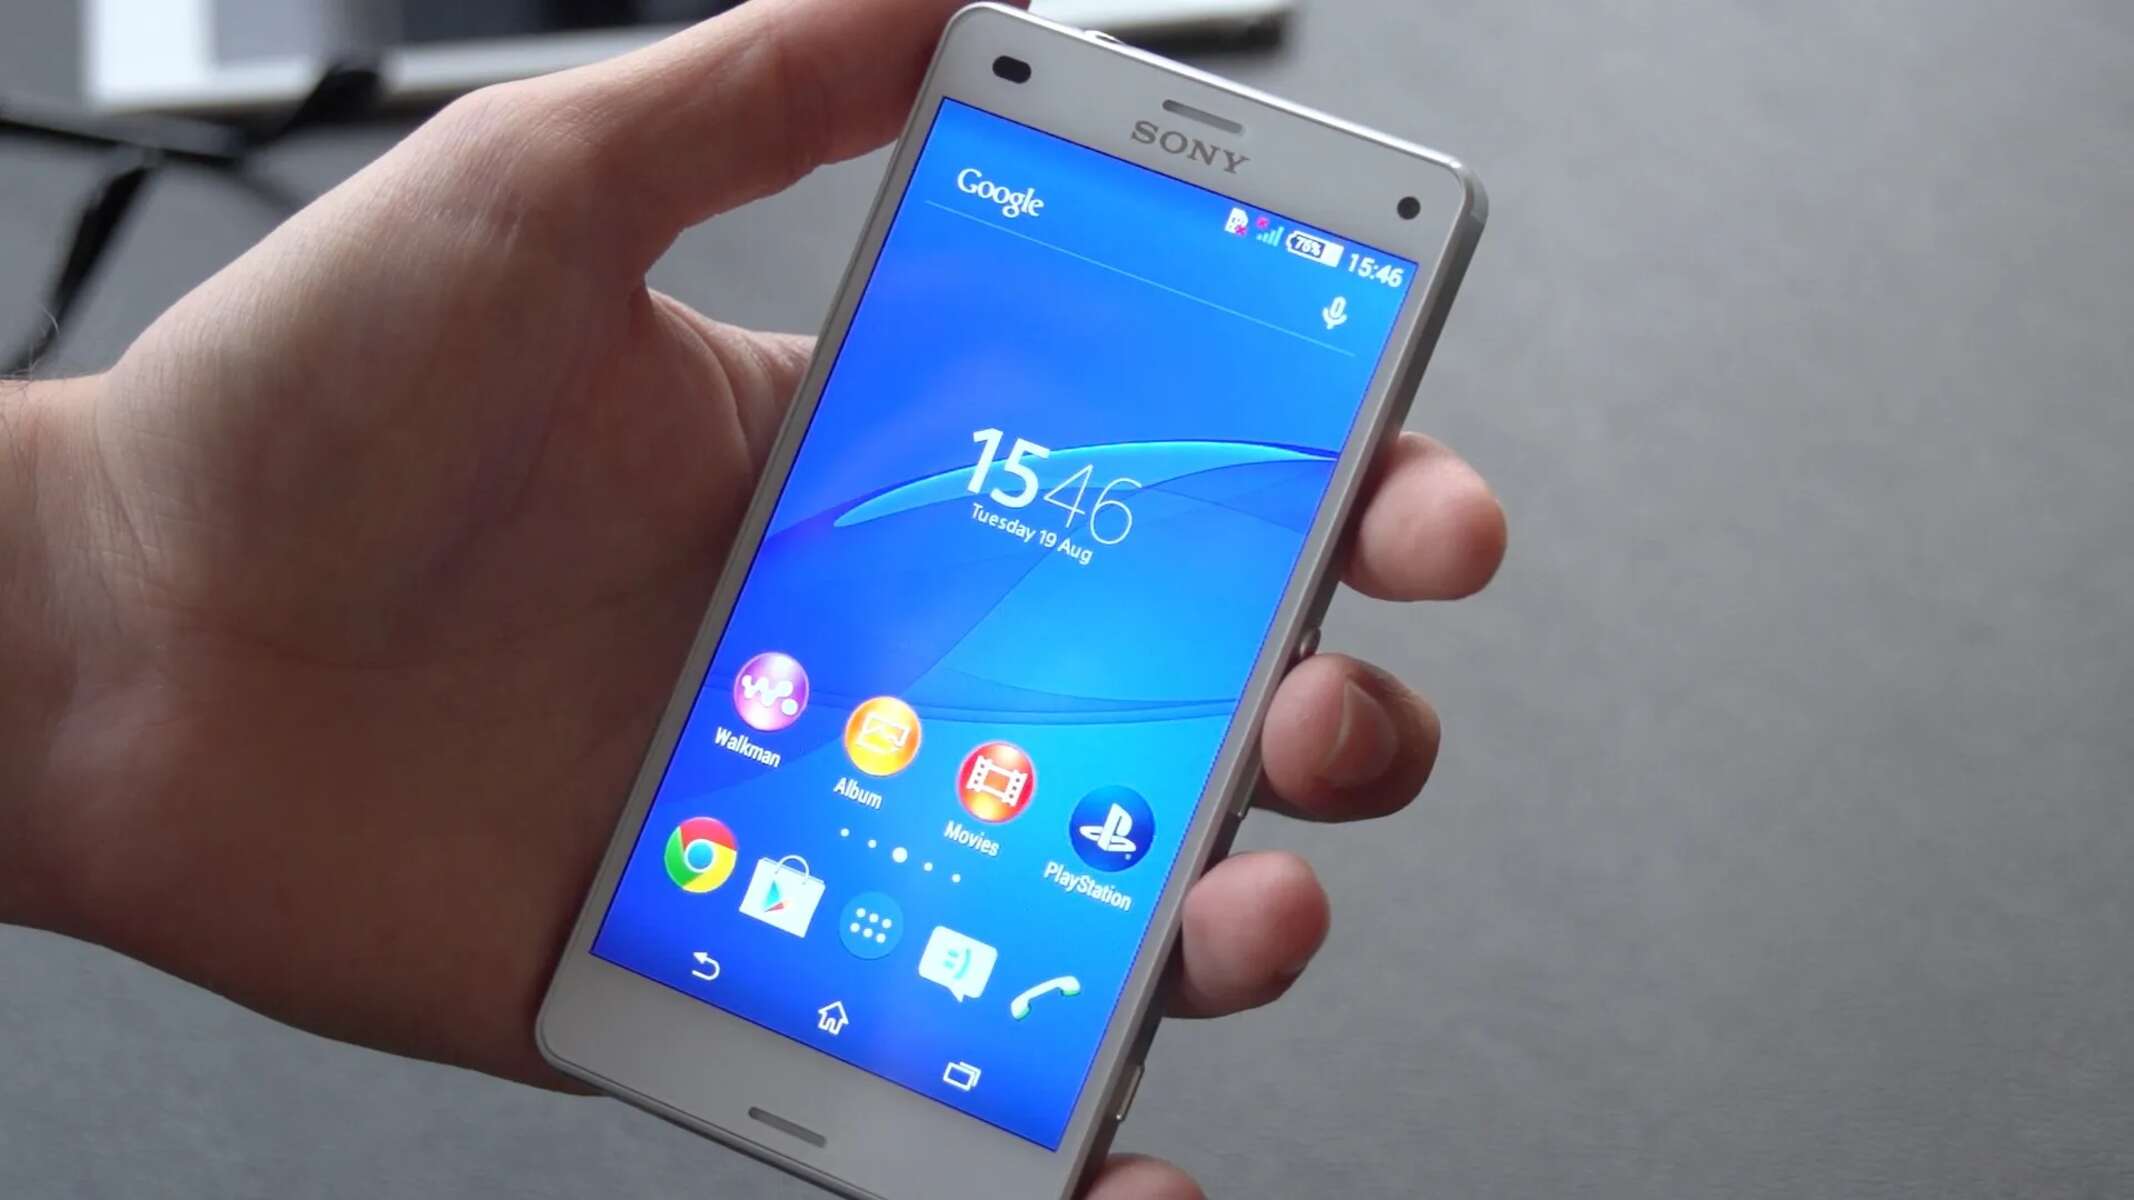 Xperia Z3 E6533 Rooting Guide: Step-by-Step Instructions